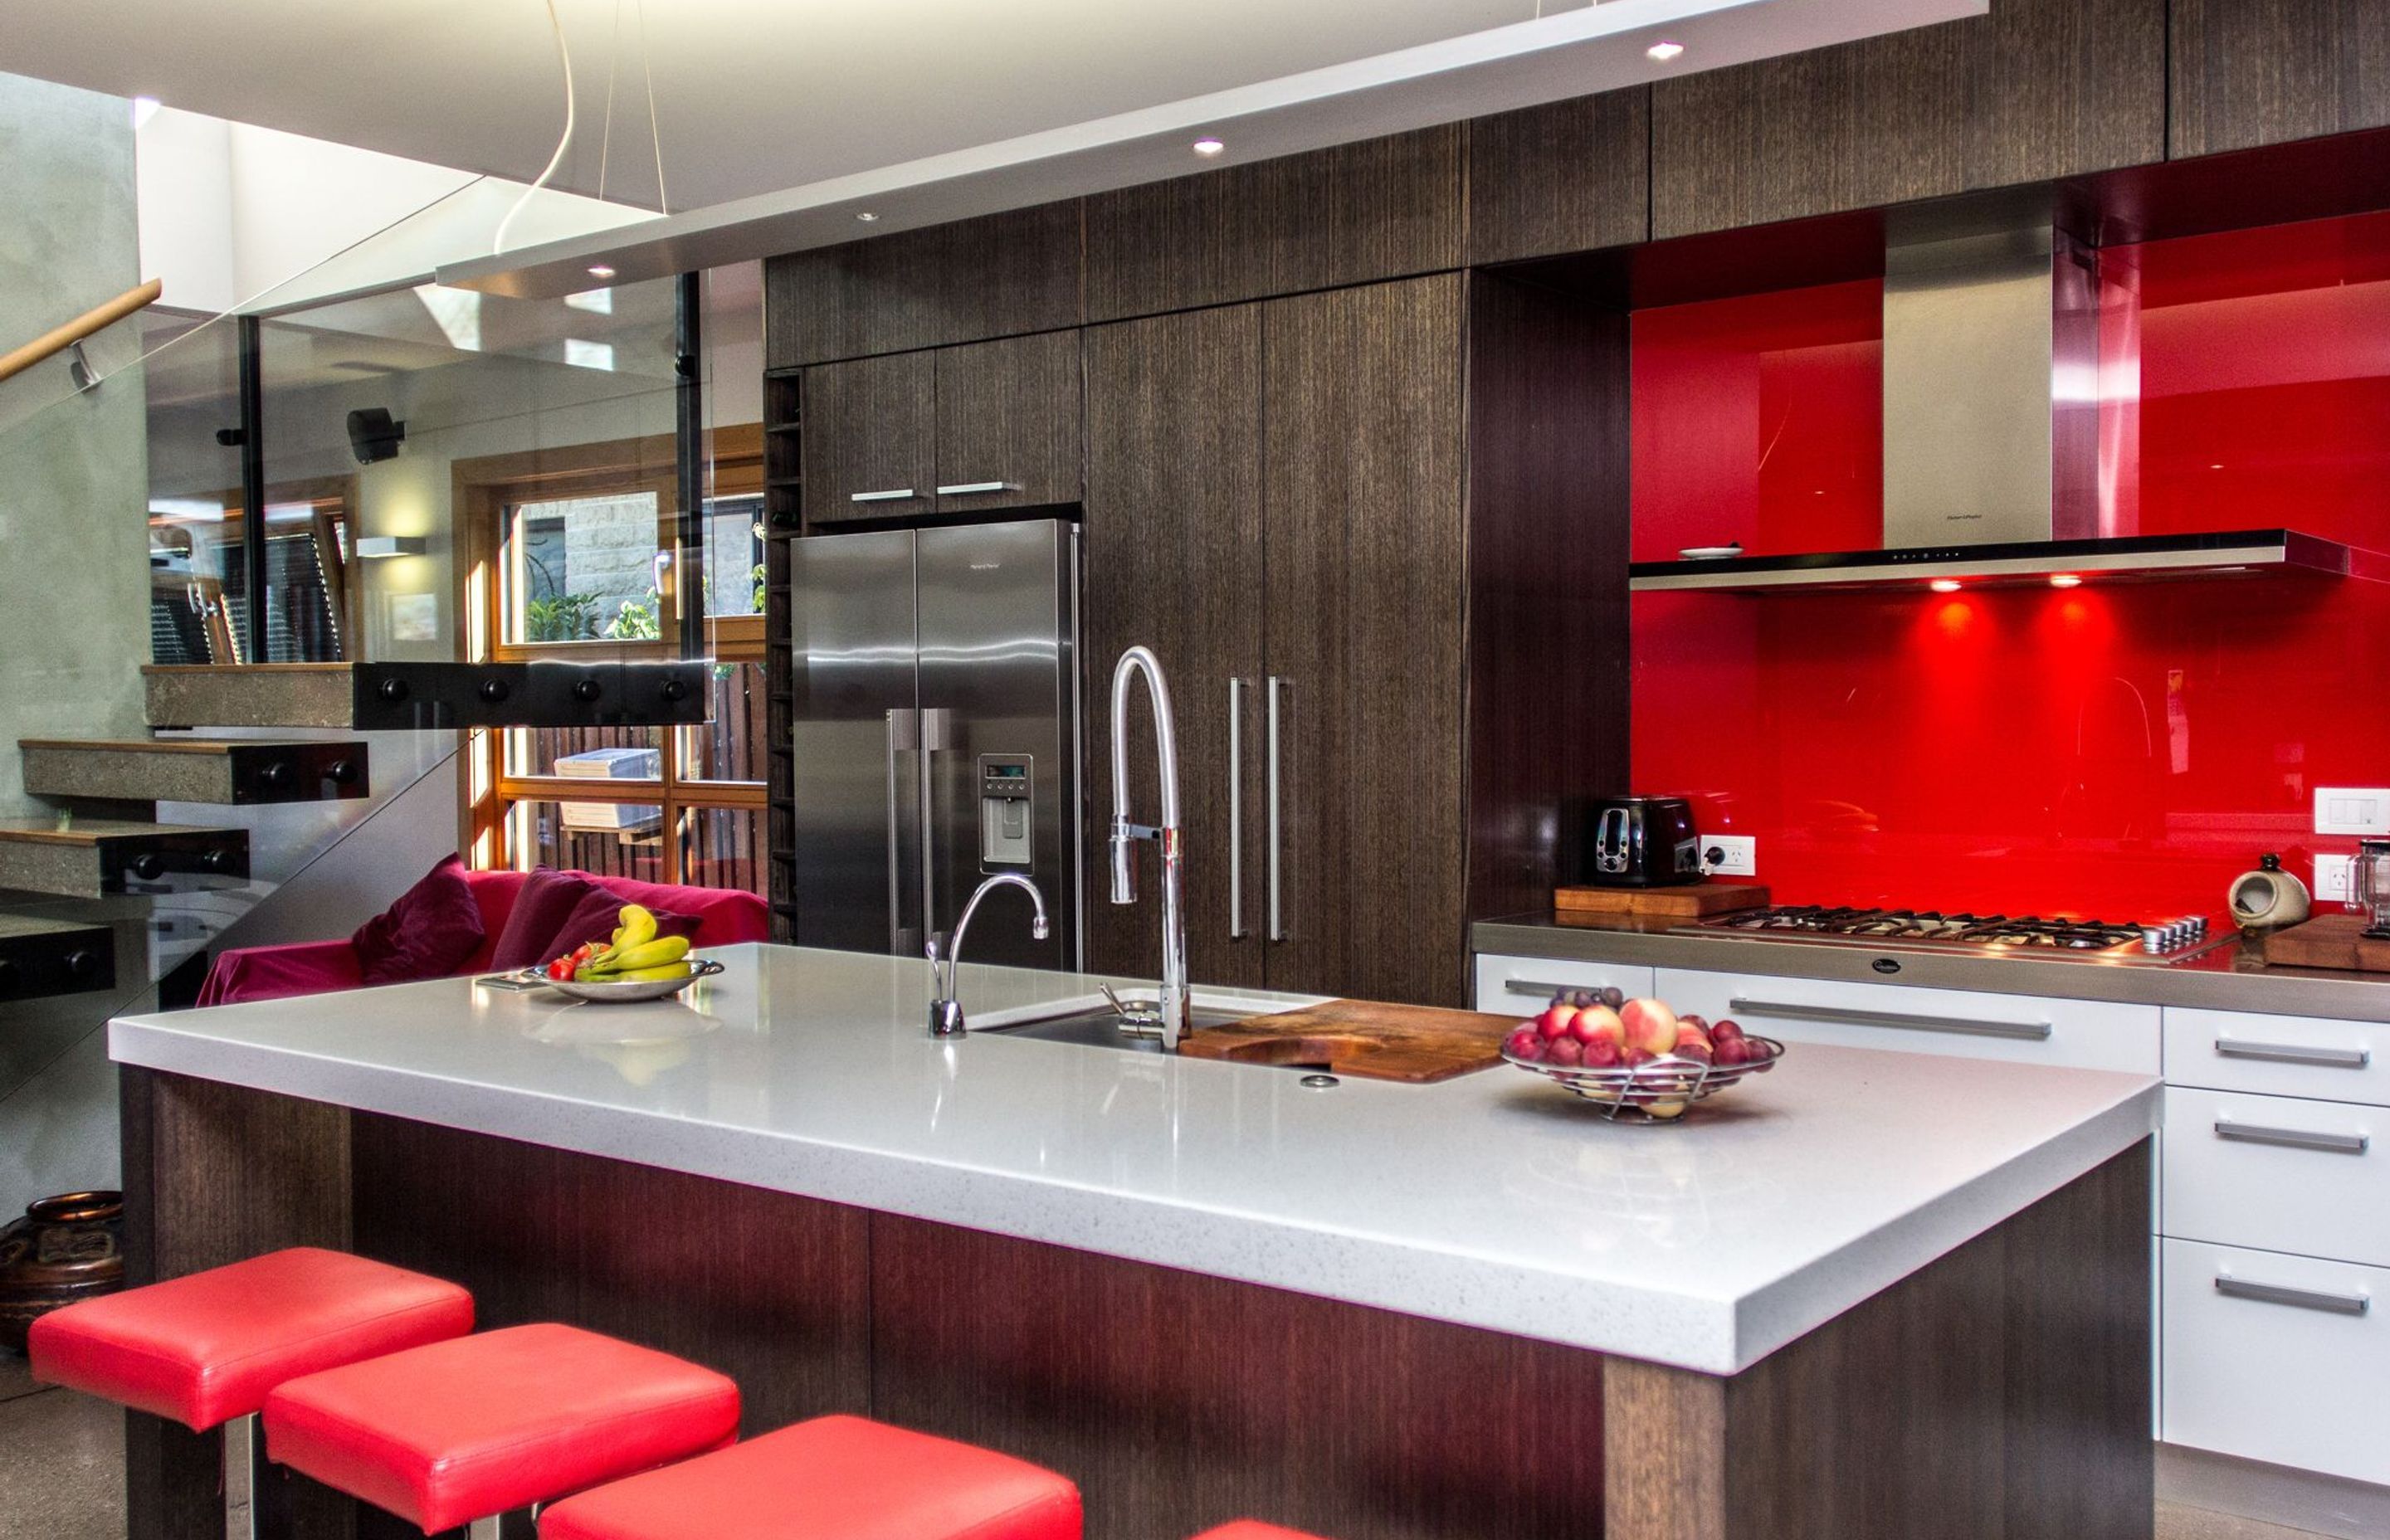 The bright colours of the kitchen add contrast and interest.